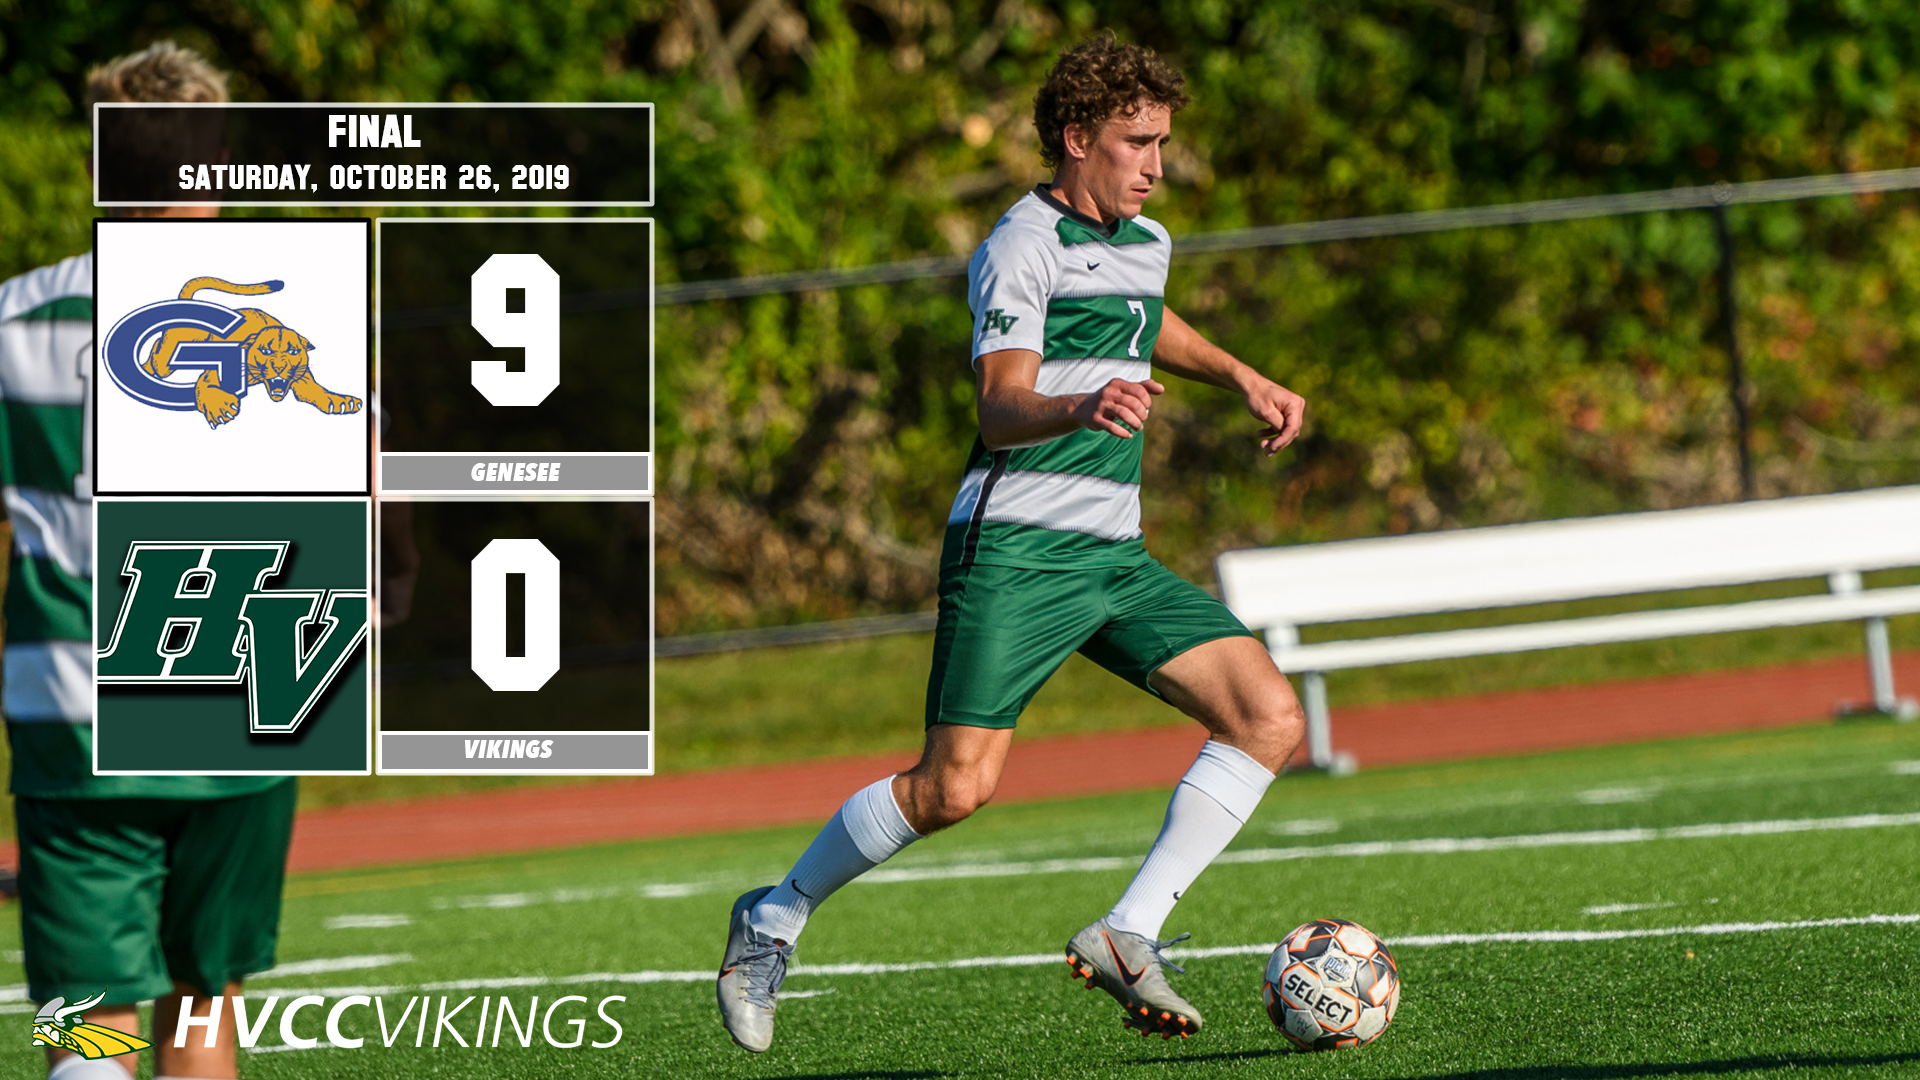 Men's soccer was defeated 9-0 by Genesee on 10/26/2019.